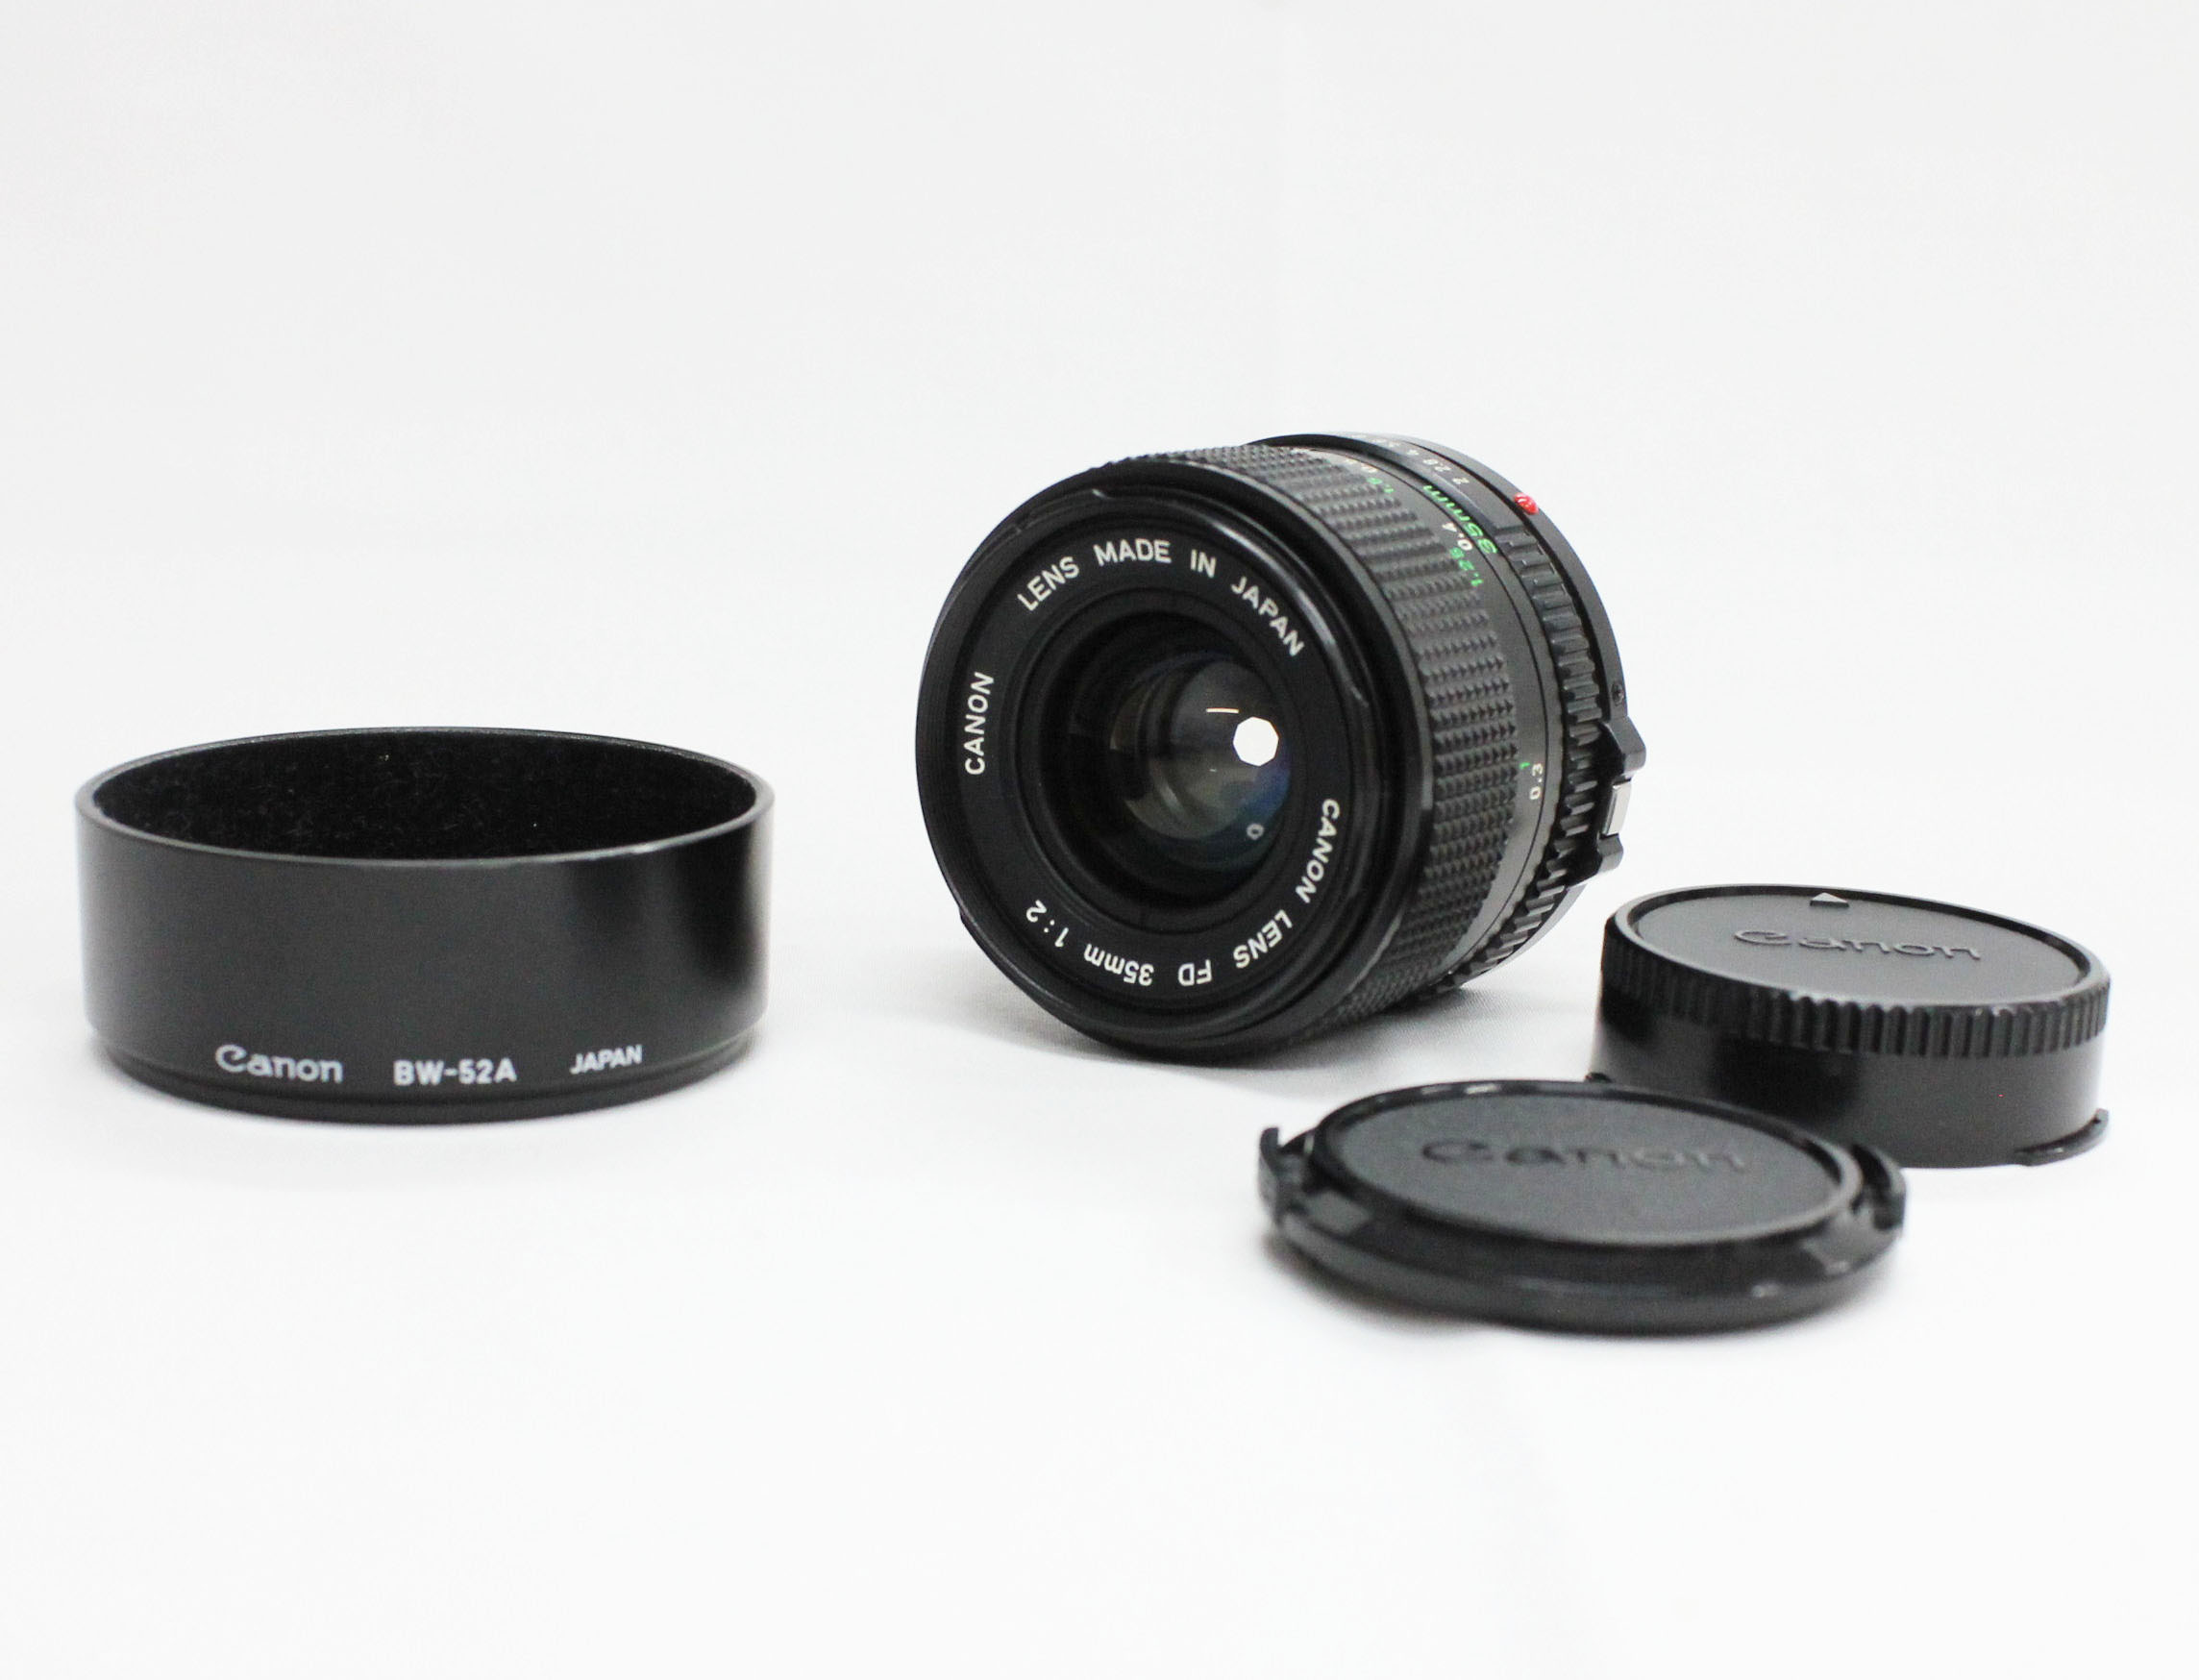 Japan Used Camera Shop | [Excellent+++++] Canon New FD NFD 35mm F/2 Wide Angle MF Lens From Japan